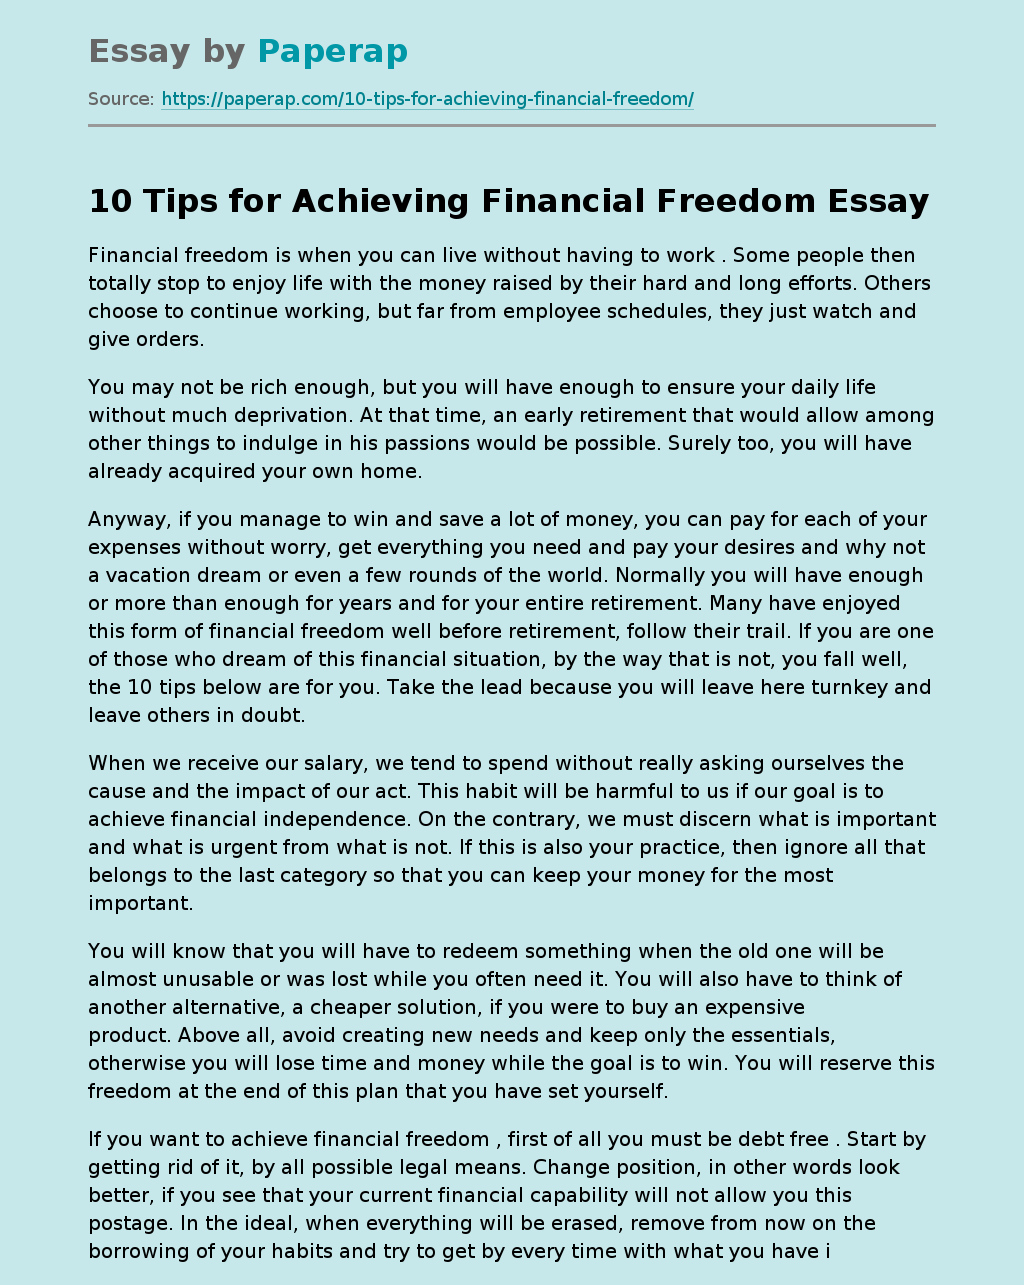 10 Tips for Achieving Financial Freedom